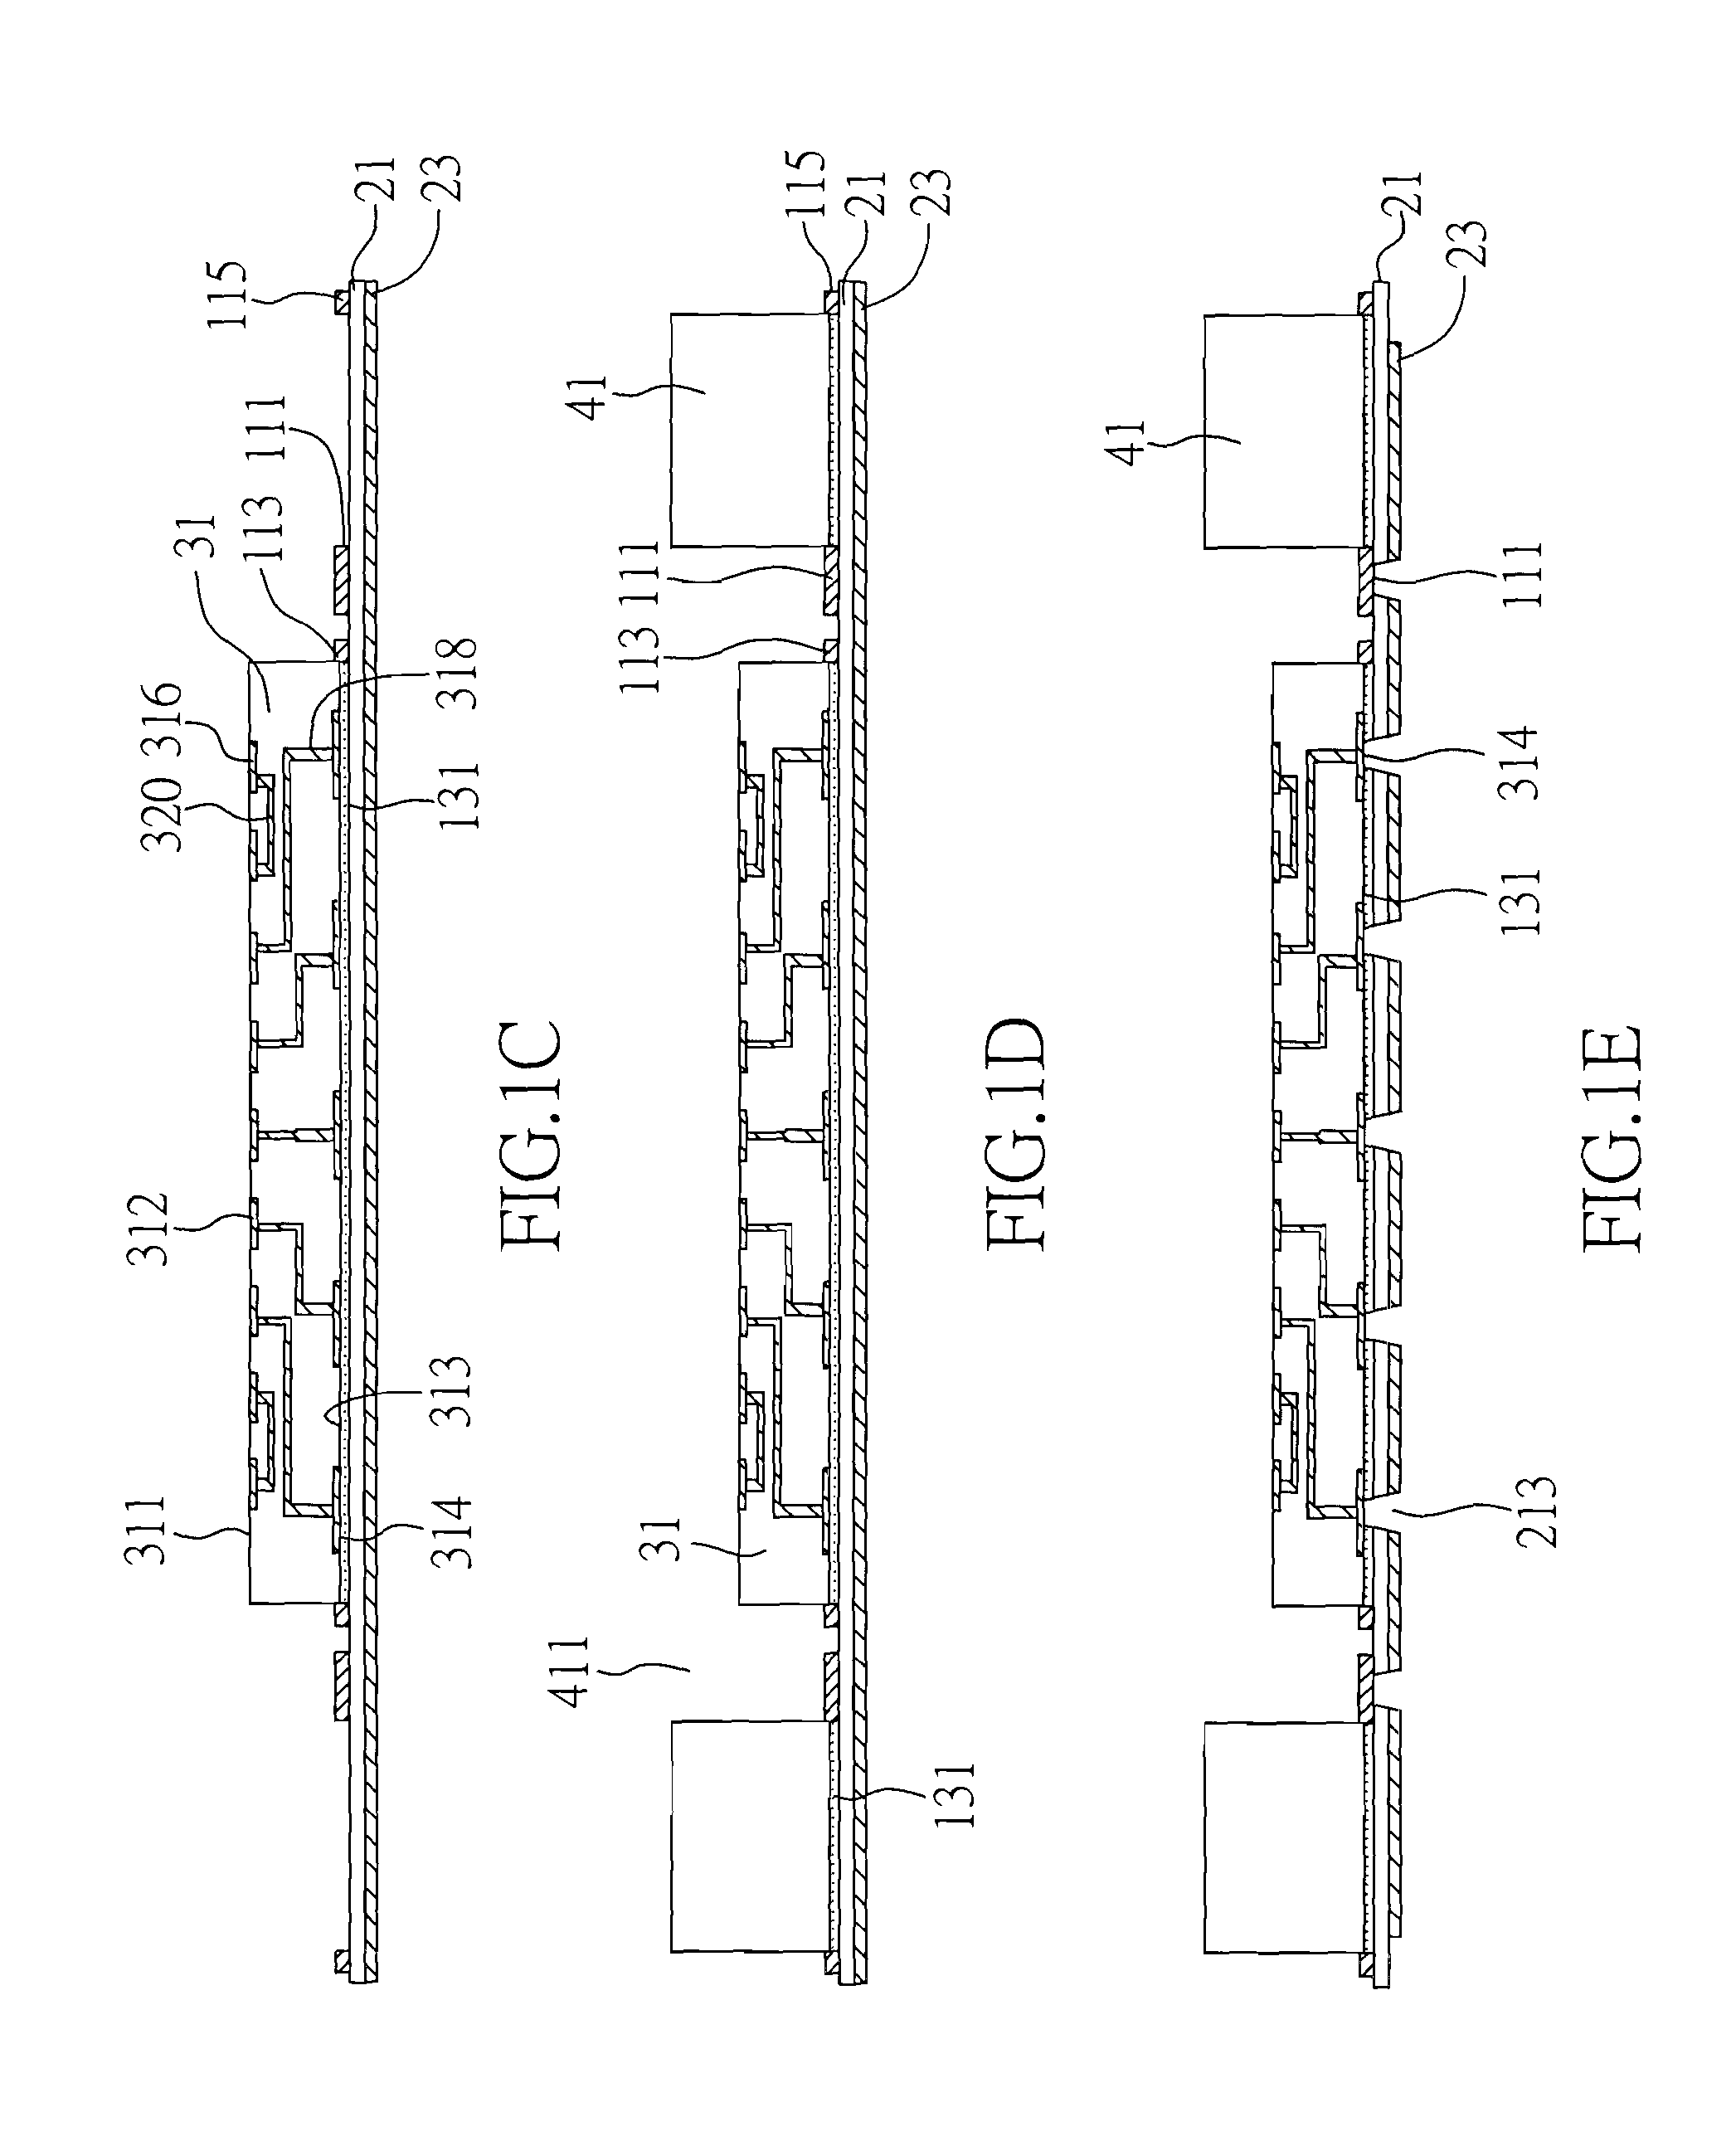 Semiconductor assembly with dual connecting channels between interposer and coreless substrate